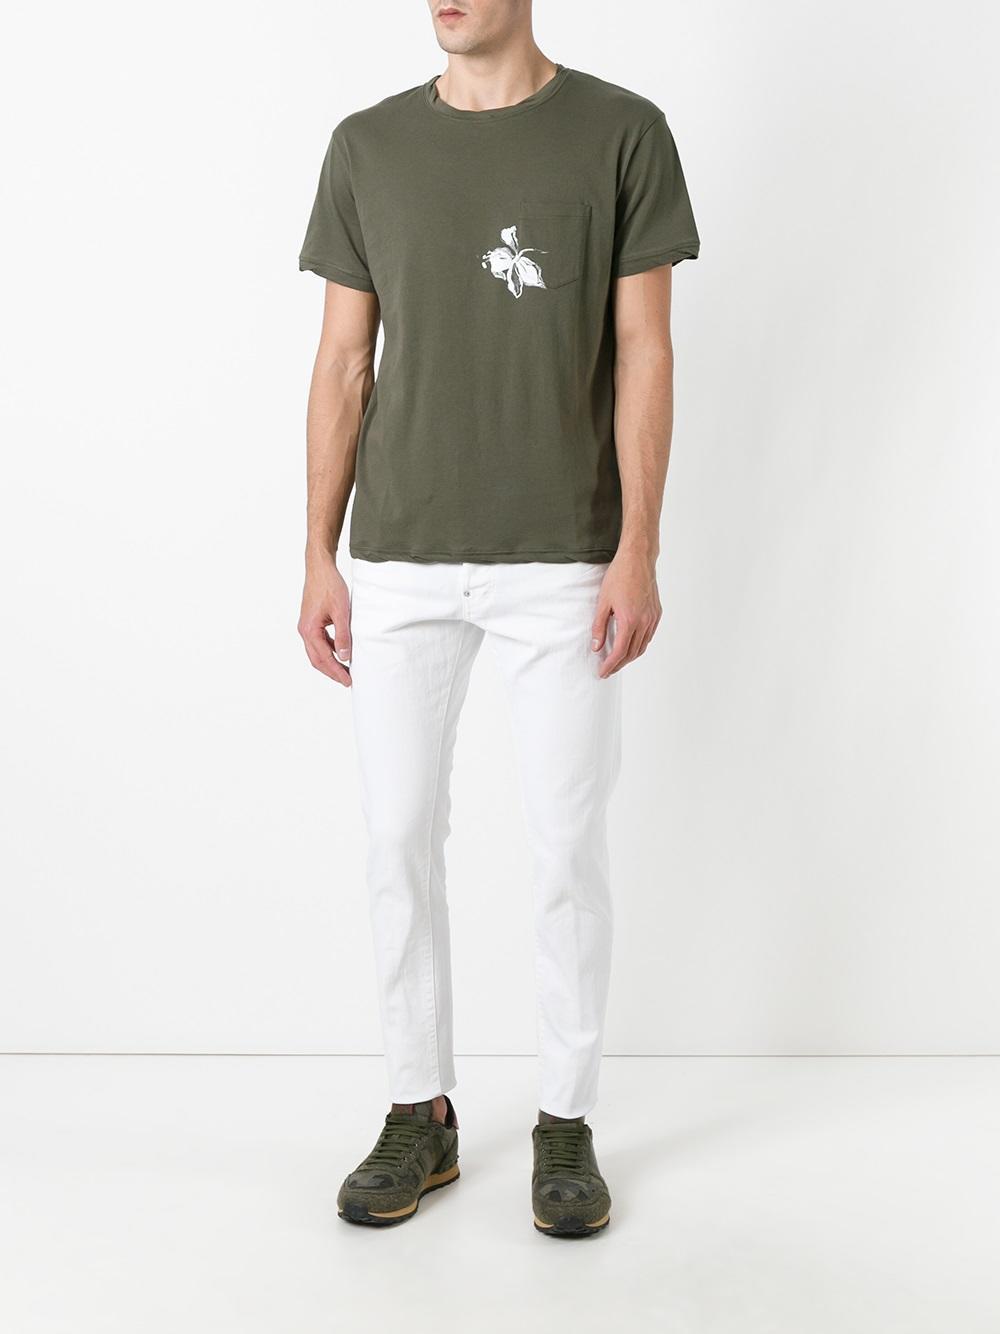 Valentino Cotton Mariposa T-shirt in Green for Men - Lyst